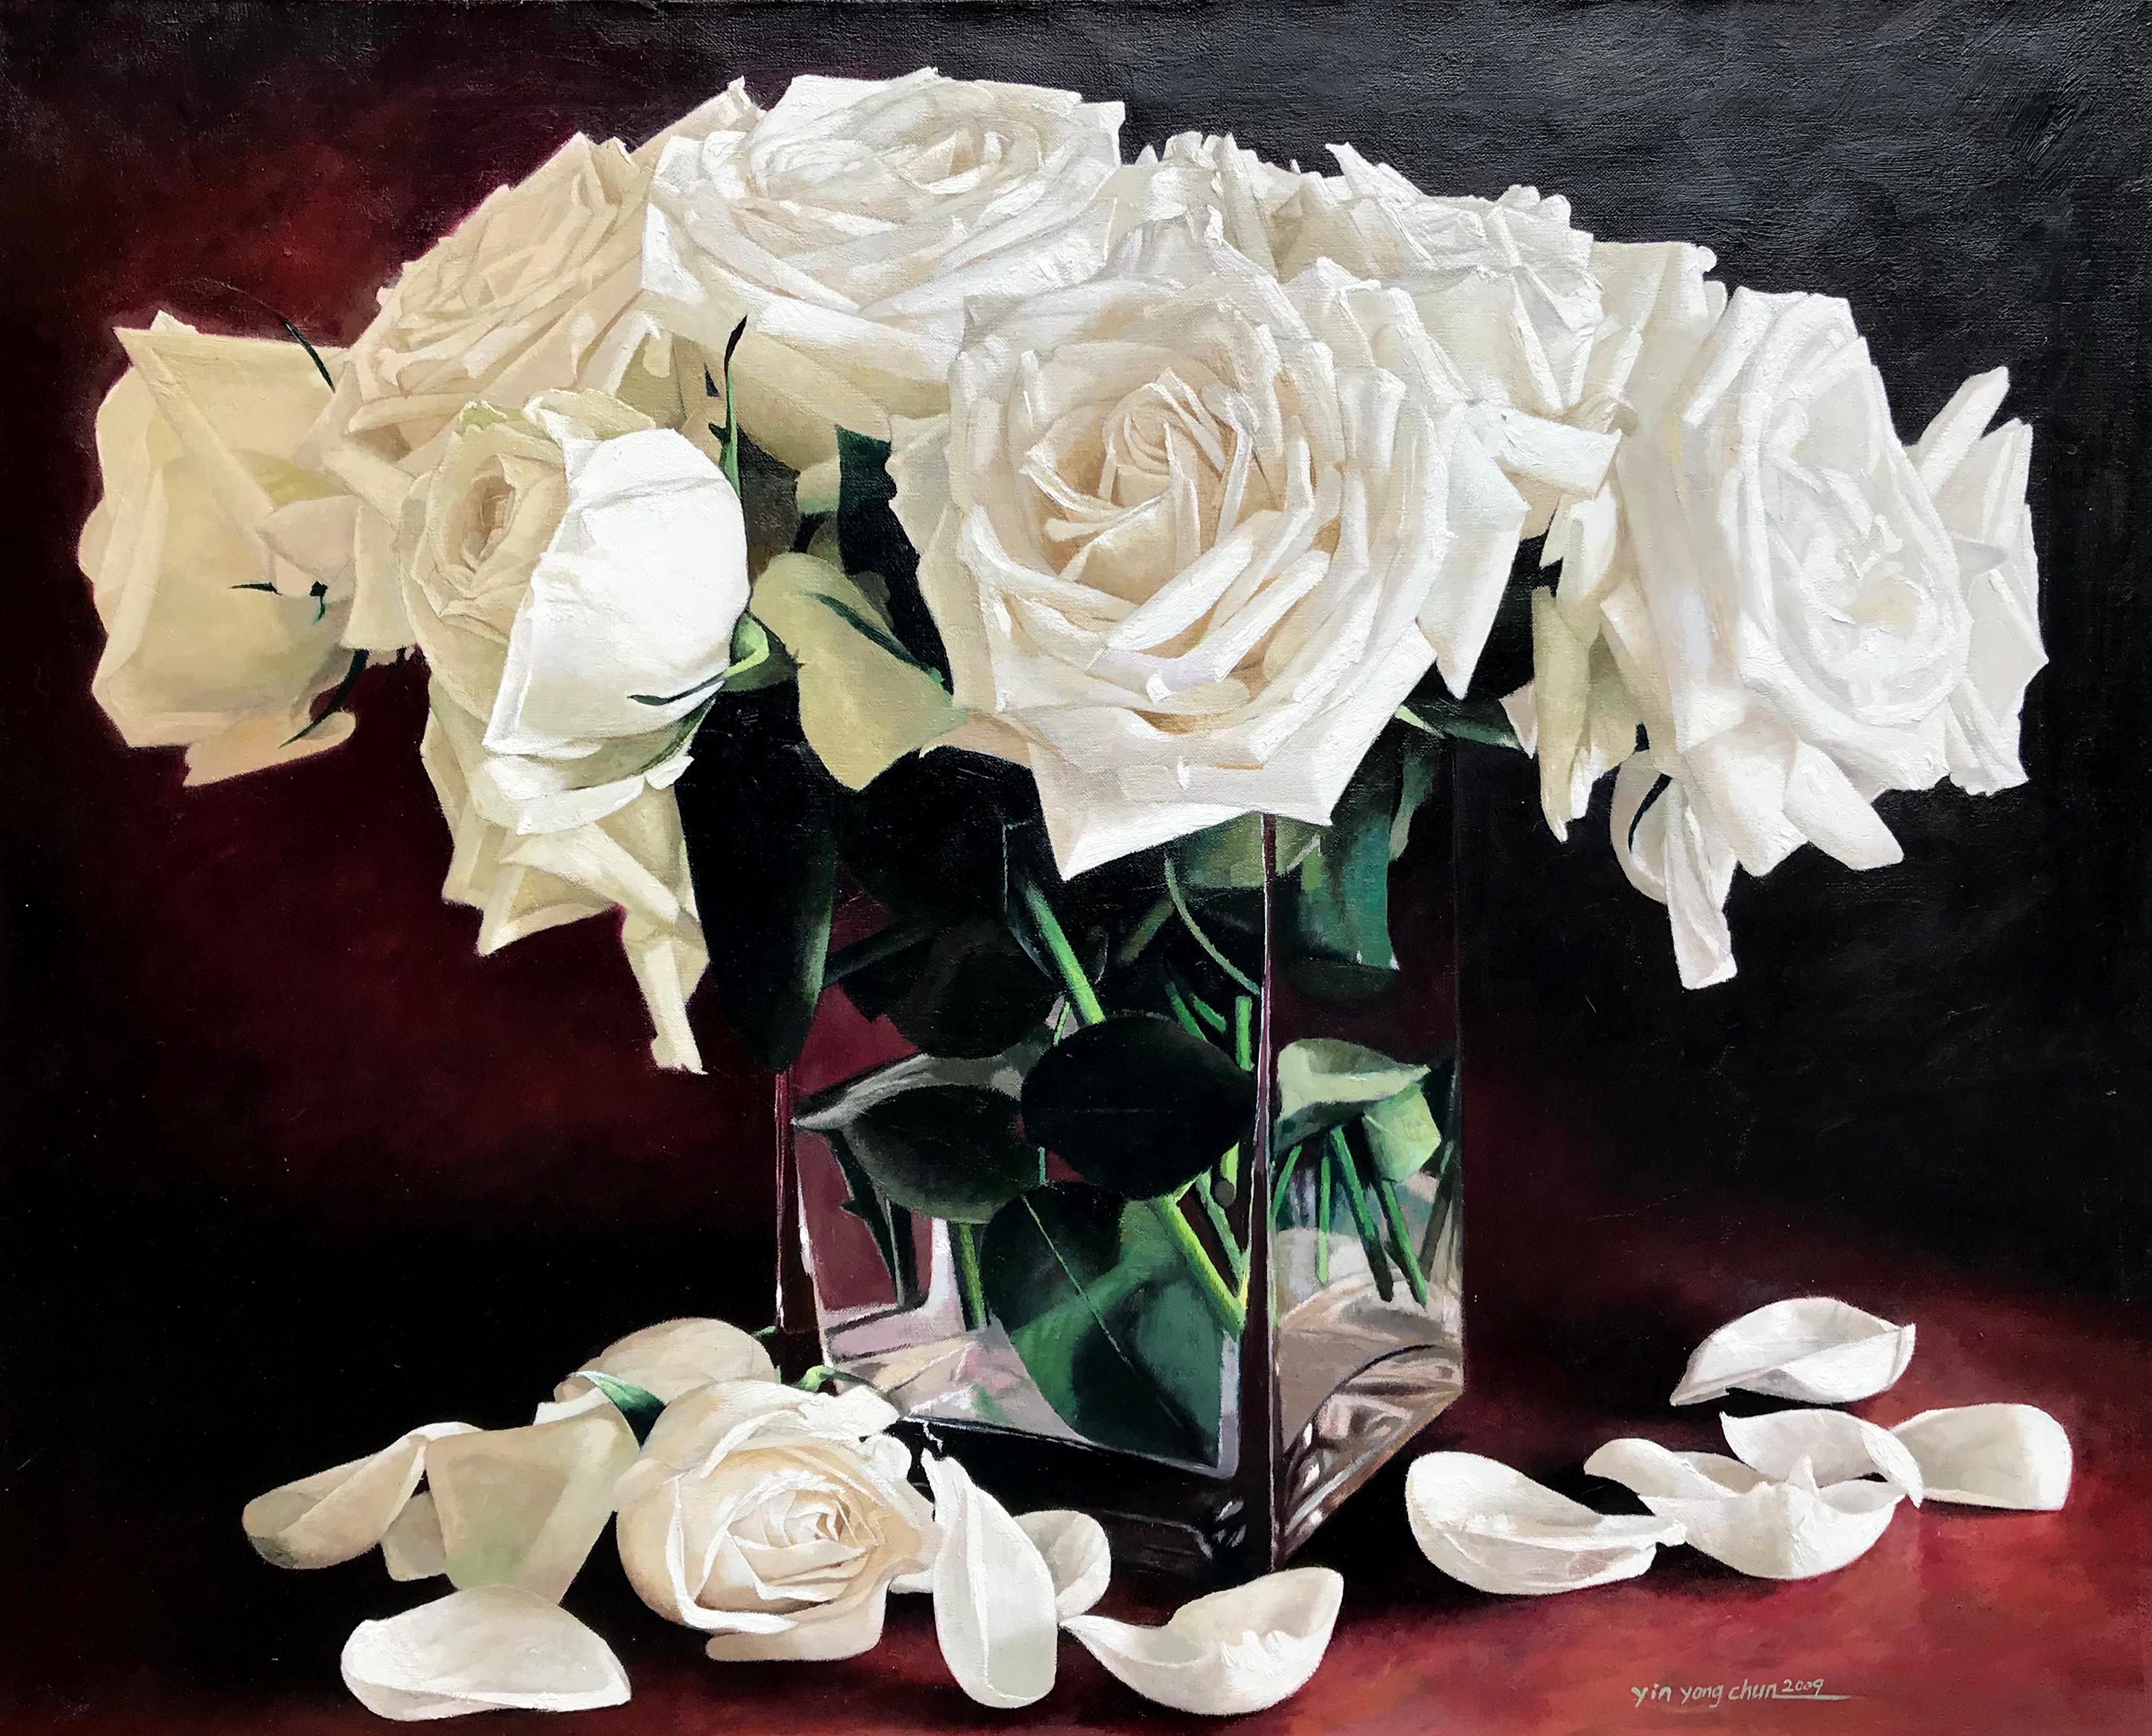 This floral still life, "White Roses", by artist Yin Yong Chun  is a 24x30 oil painting on canvas featuring a bouquet of white roses in a glass vase with fallen white petals on the table. The background is a deep burgundy.

About the artist:
Born in